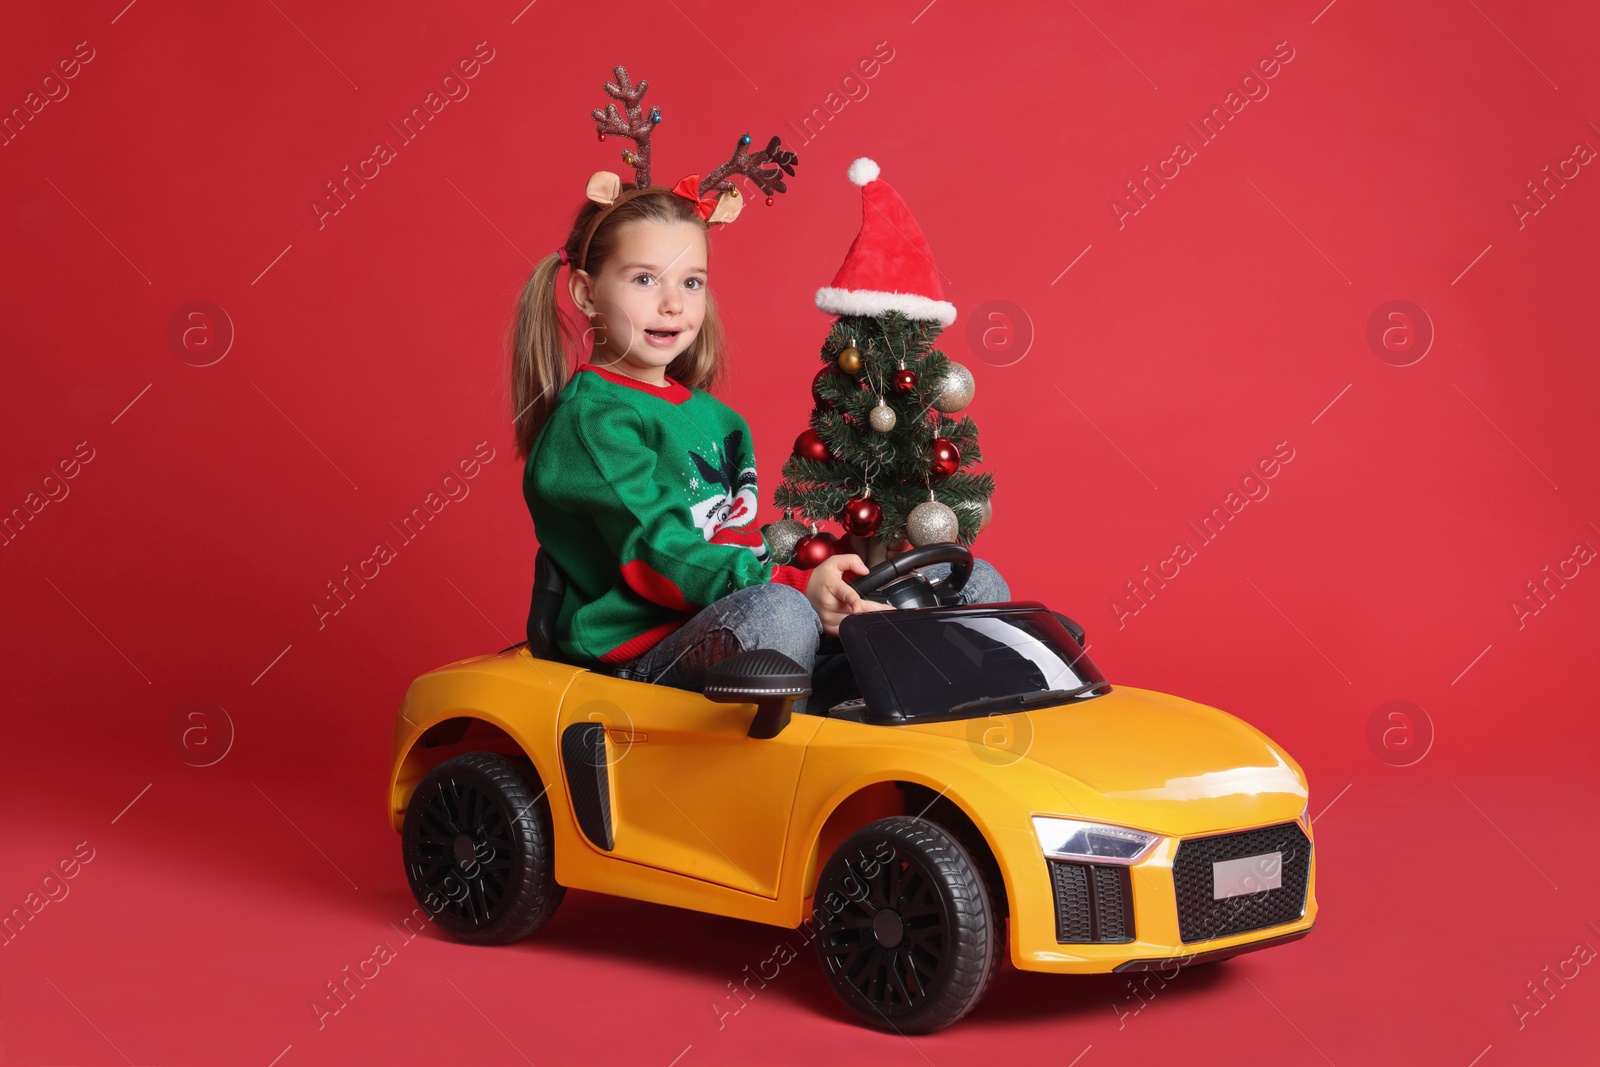 Photo of Cute little girl with Christmas tree driving children's electric toy car on red background